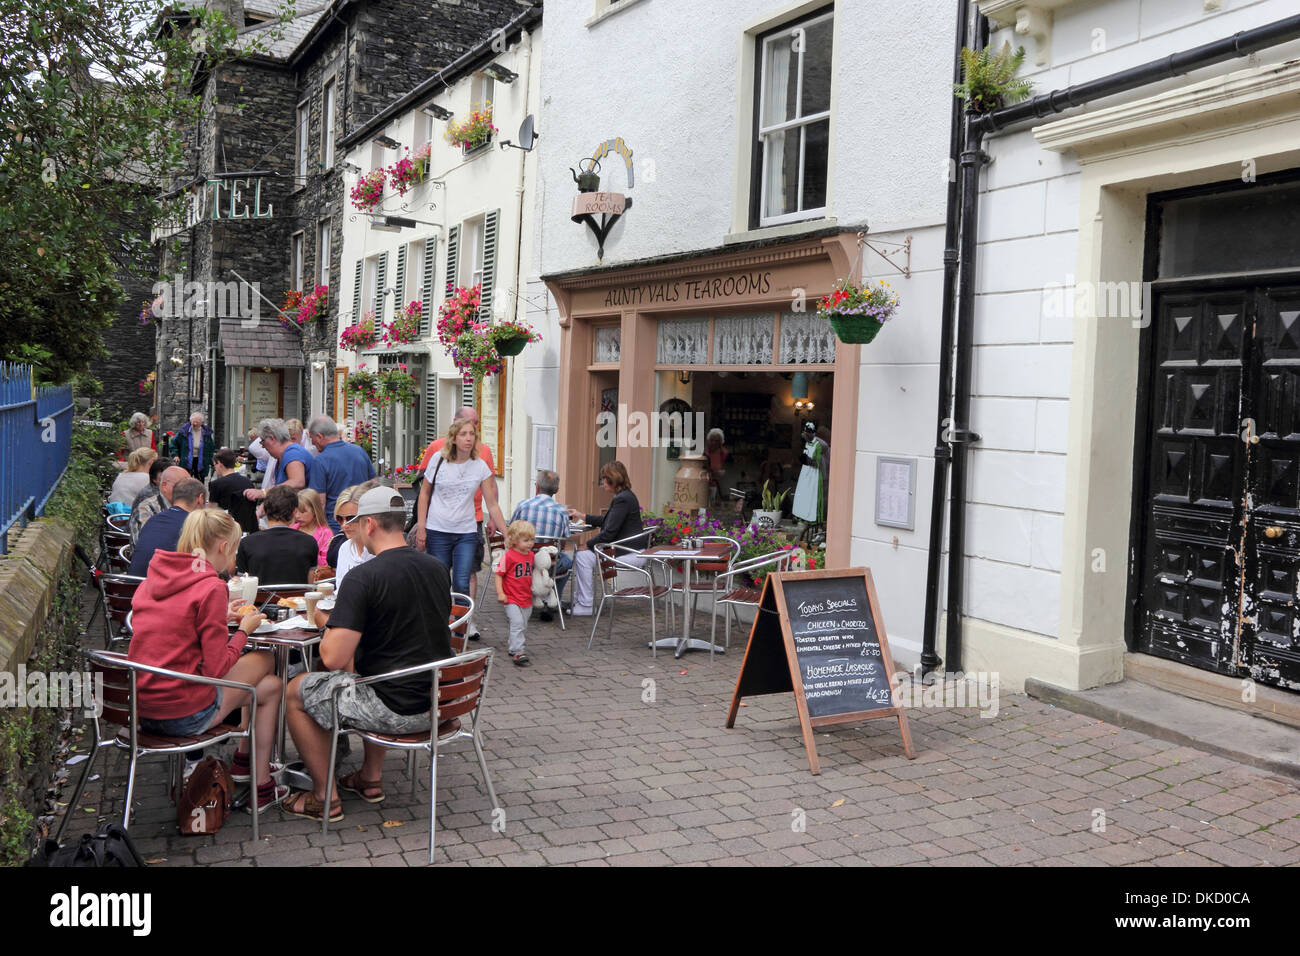 Streetside cafe with customers eating at outdoor tables, Bowness Stock Photo